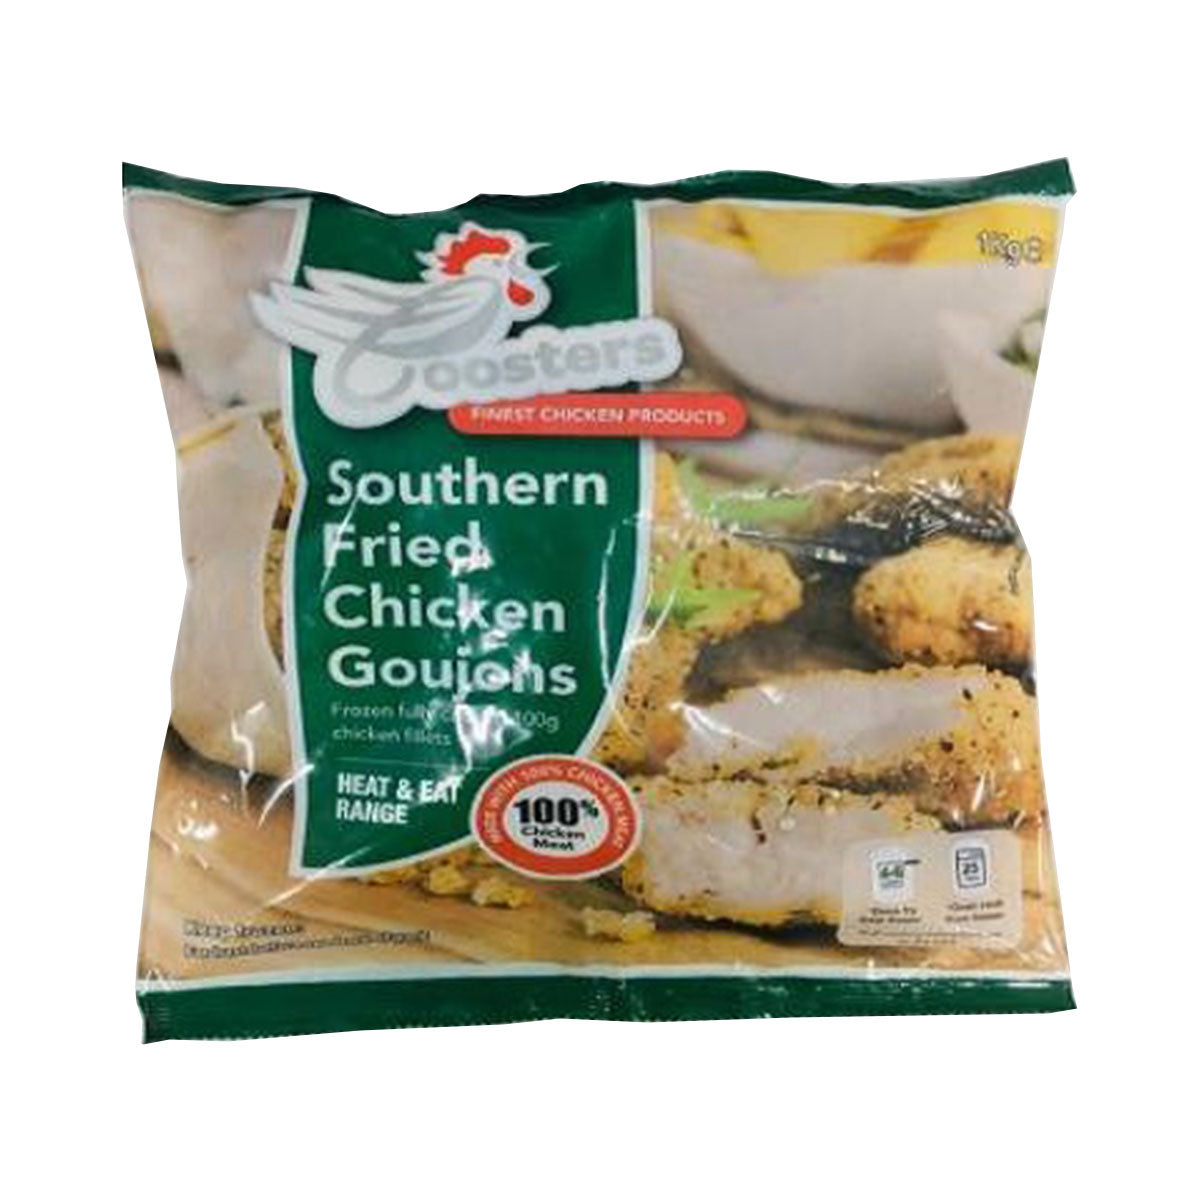 Coosters Southern Fried Goujons